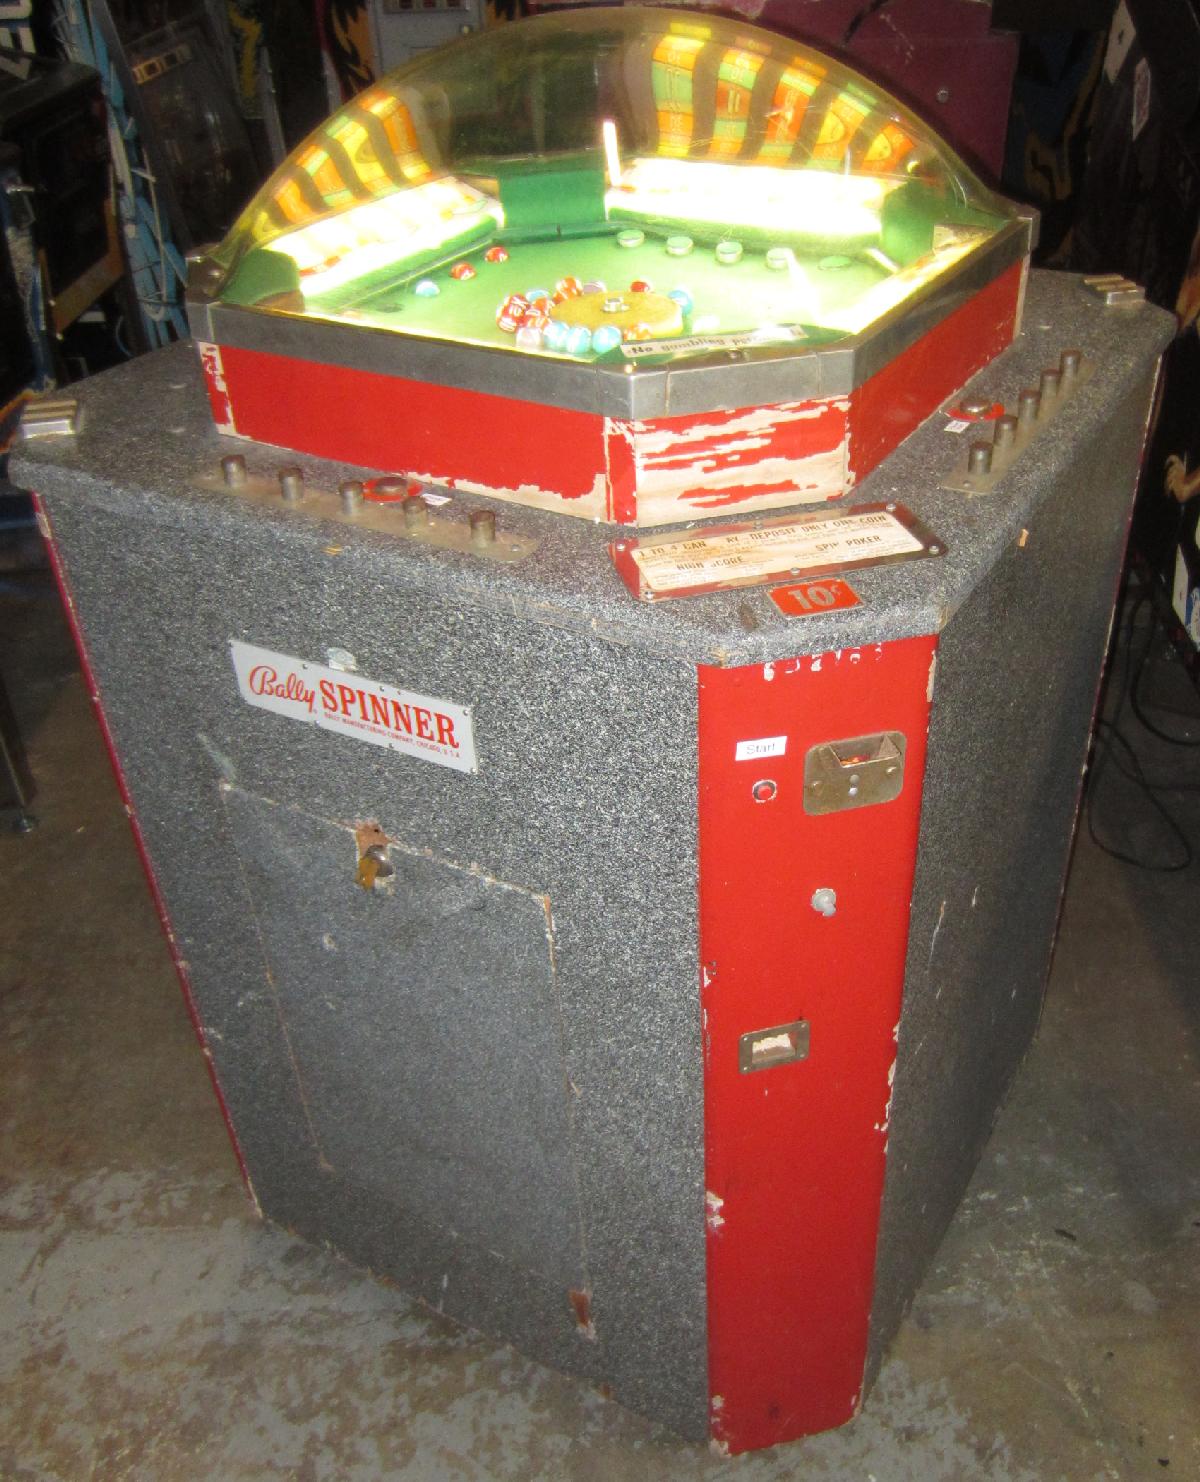 1962 Bally Spinner coin operated arcade game